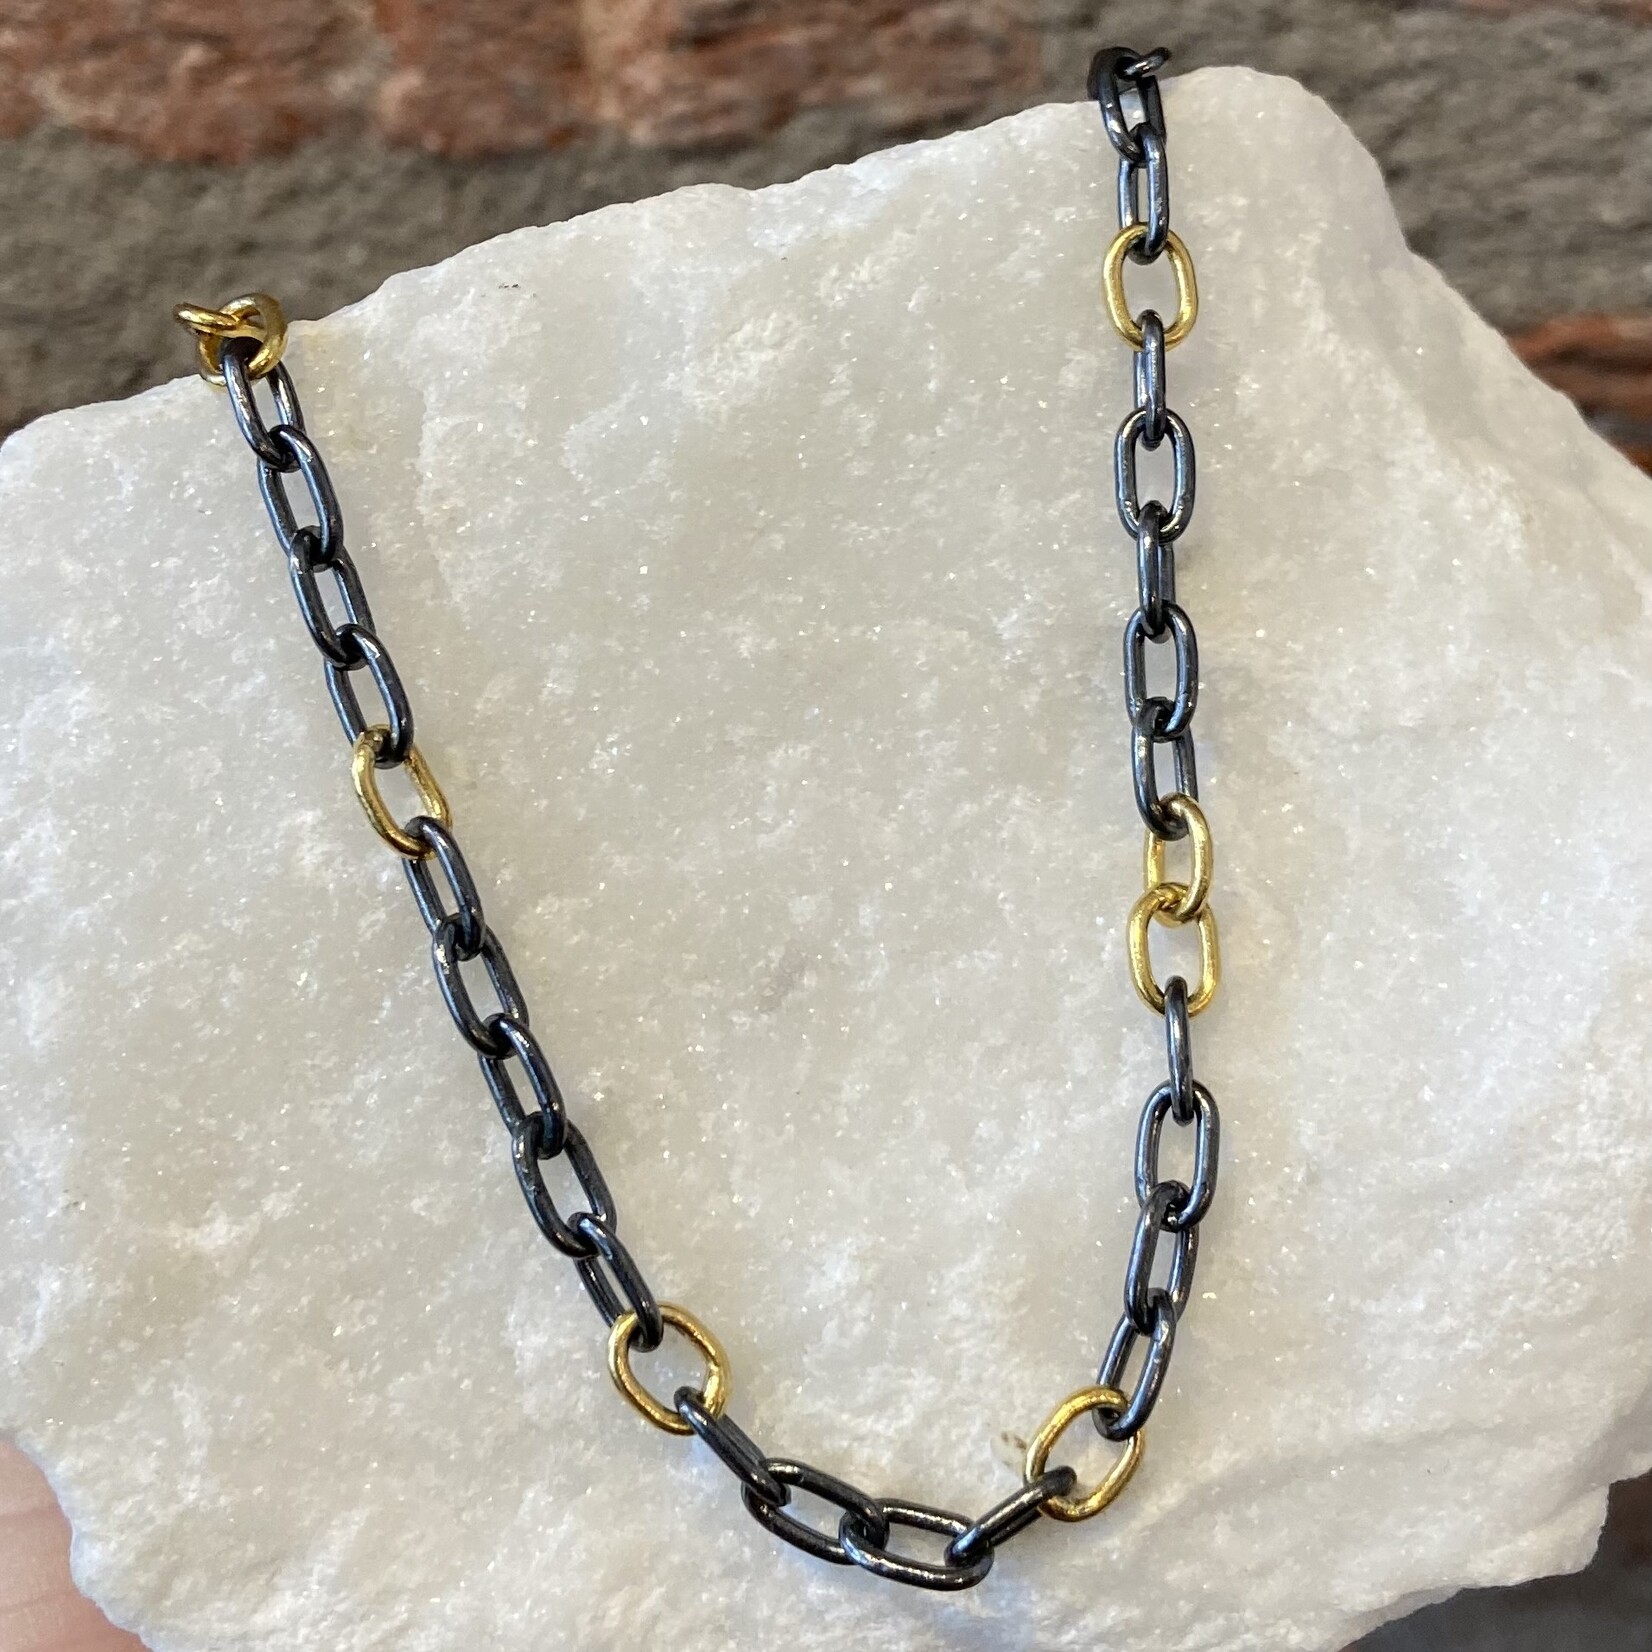 ARA Collection 24k Gold and Oxidized Silver Chain